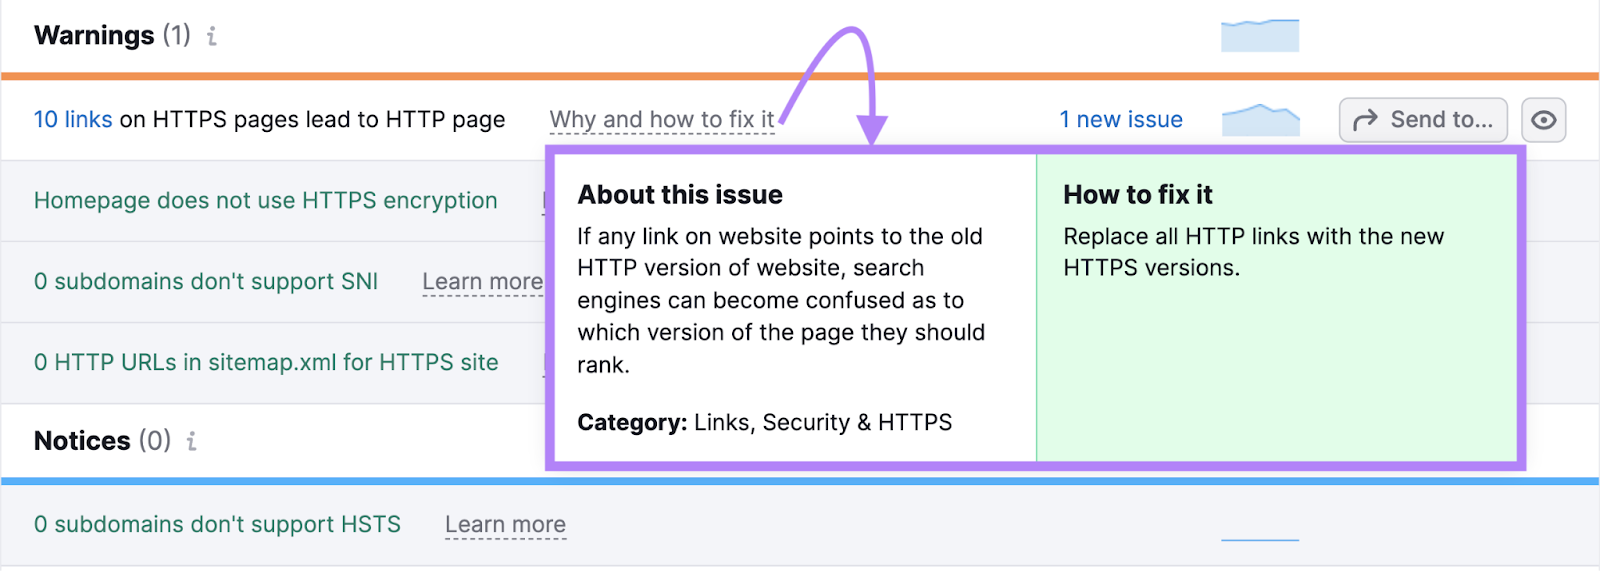 pop up shows more about the https issue and how to fix it